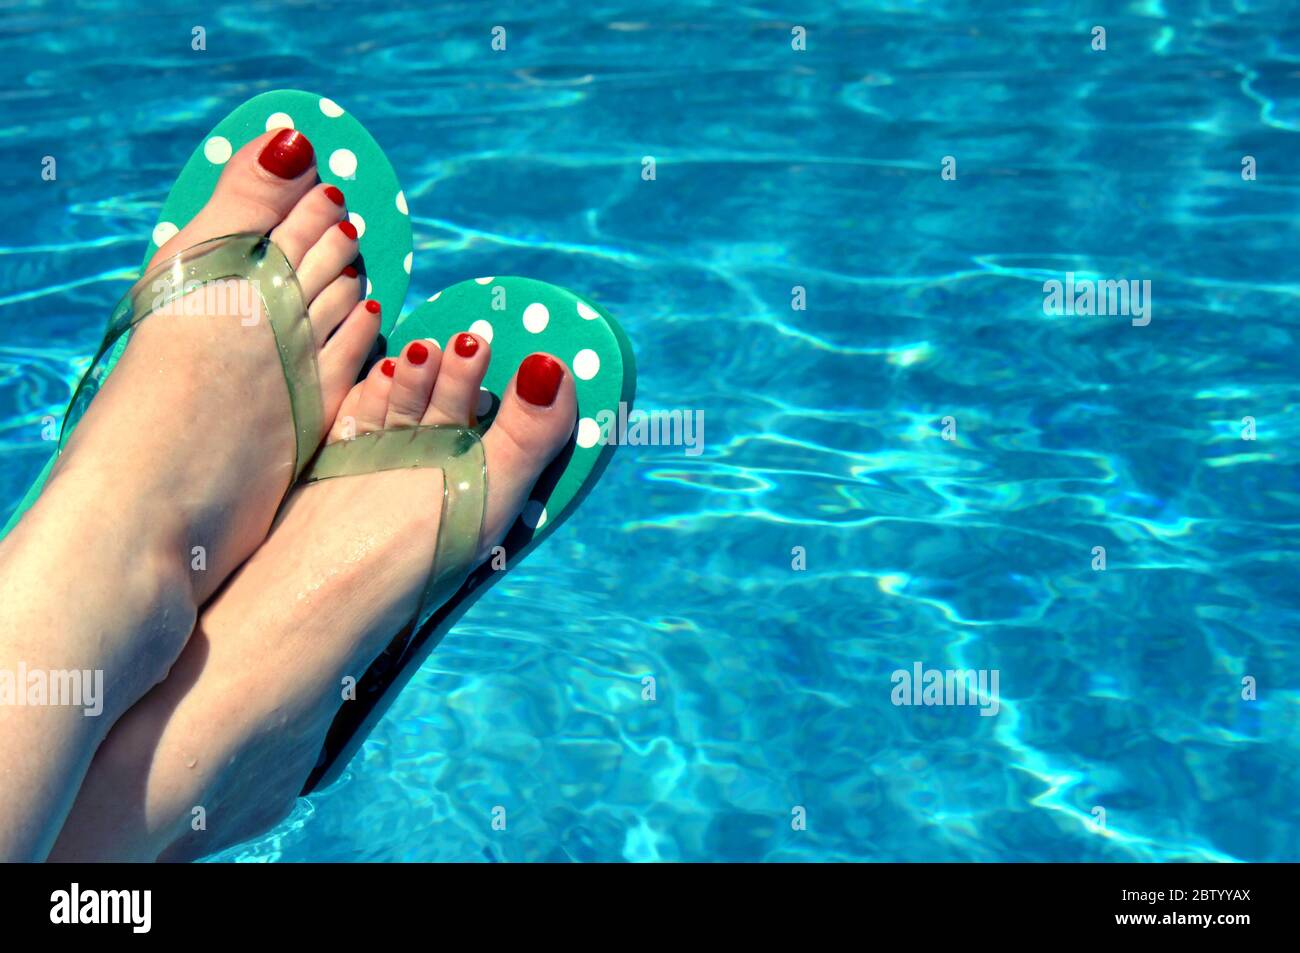 Aqua blue swimming pool frames polka-dotted flip flops worn by a woman with red  painted toe nails. Stock Photo